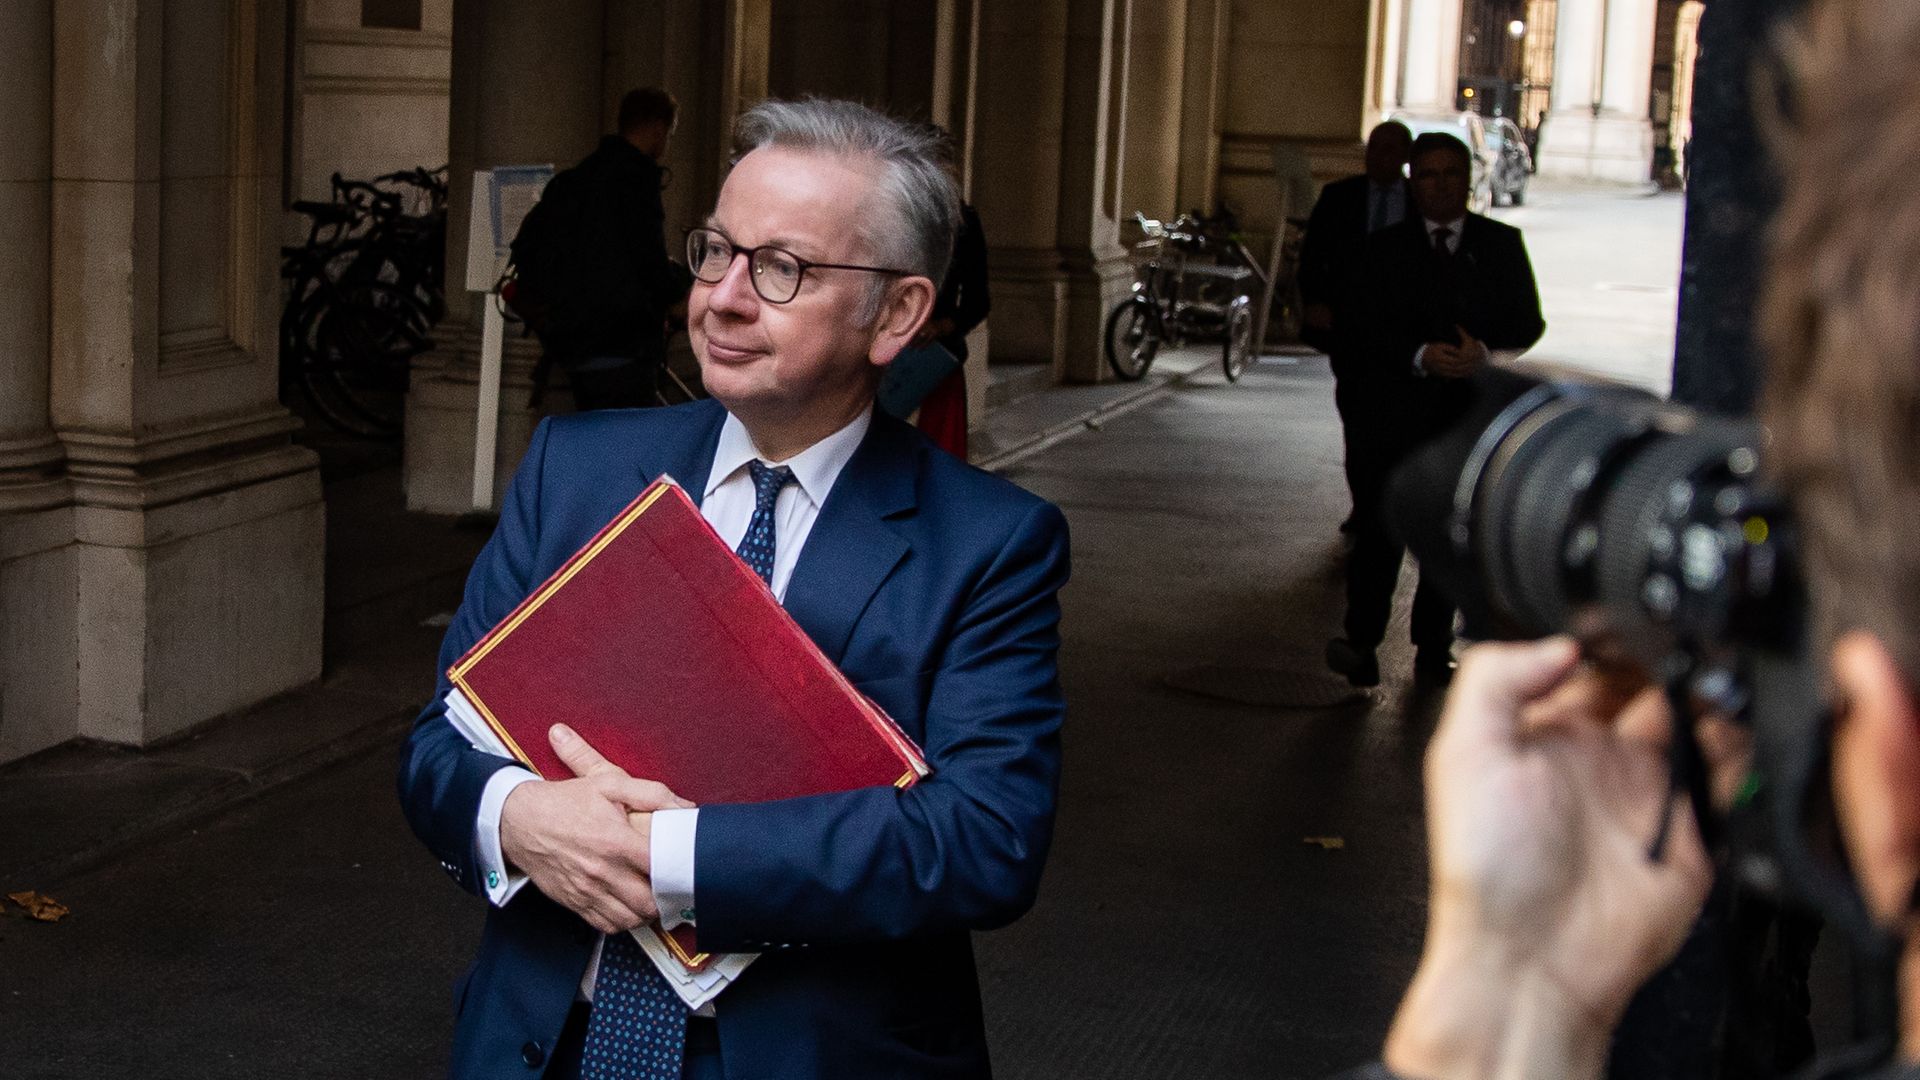 Chancellor of the Duchy of Lancaster Michael Gove arrives in Downing Street - Credit: PA